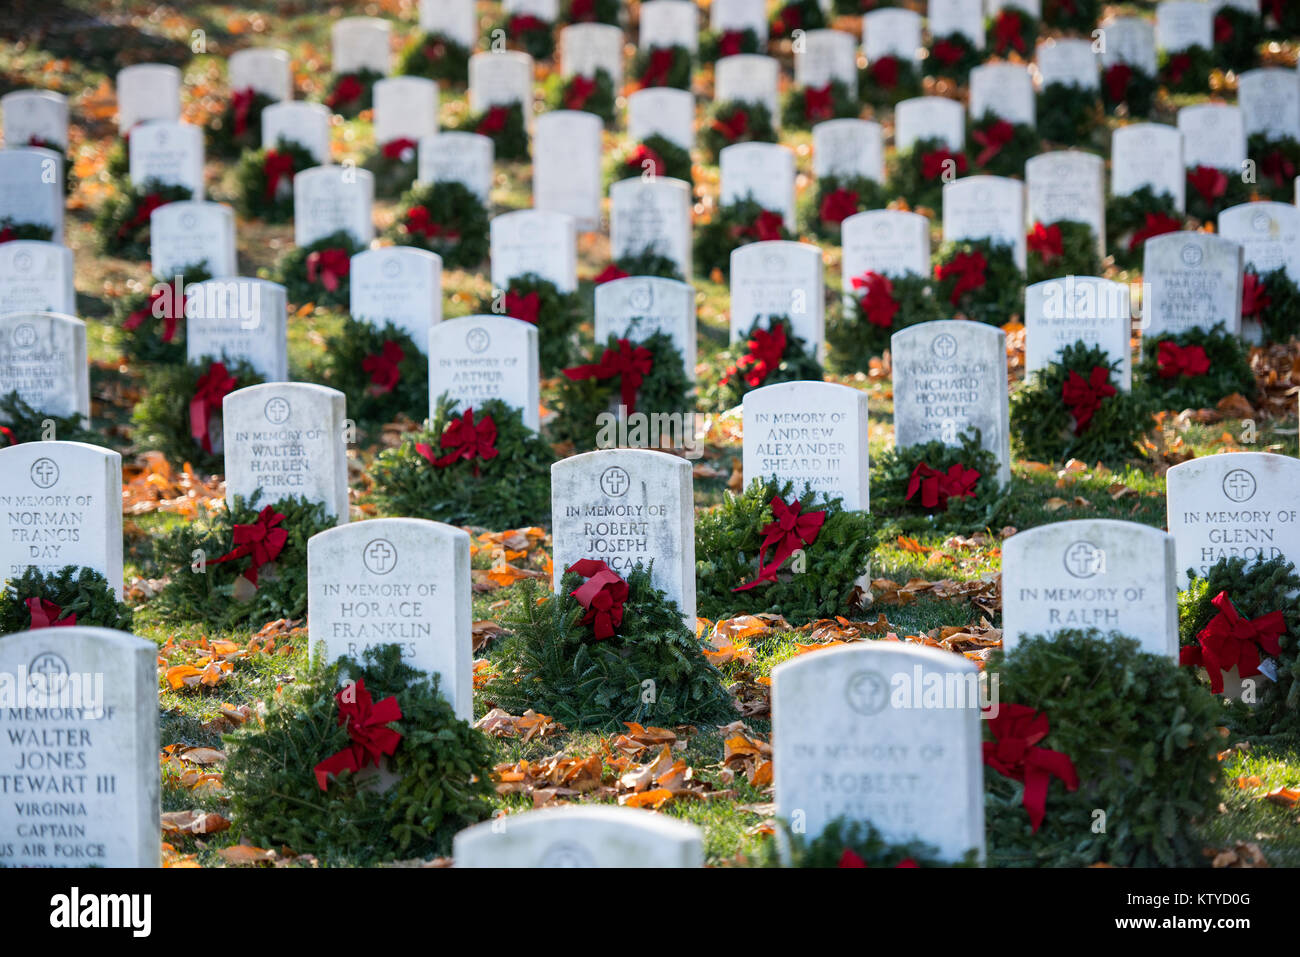 Wreaths sit in front of headstones during Wreaths Across America at the Arlington National Cemetery December 16, 2017 in Arlington, Virginia. Stock Photo